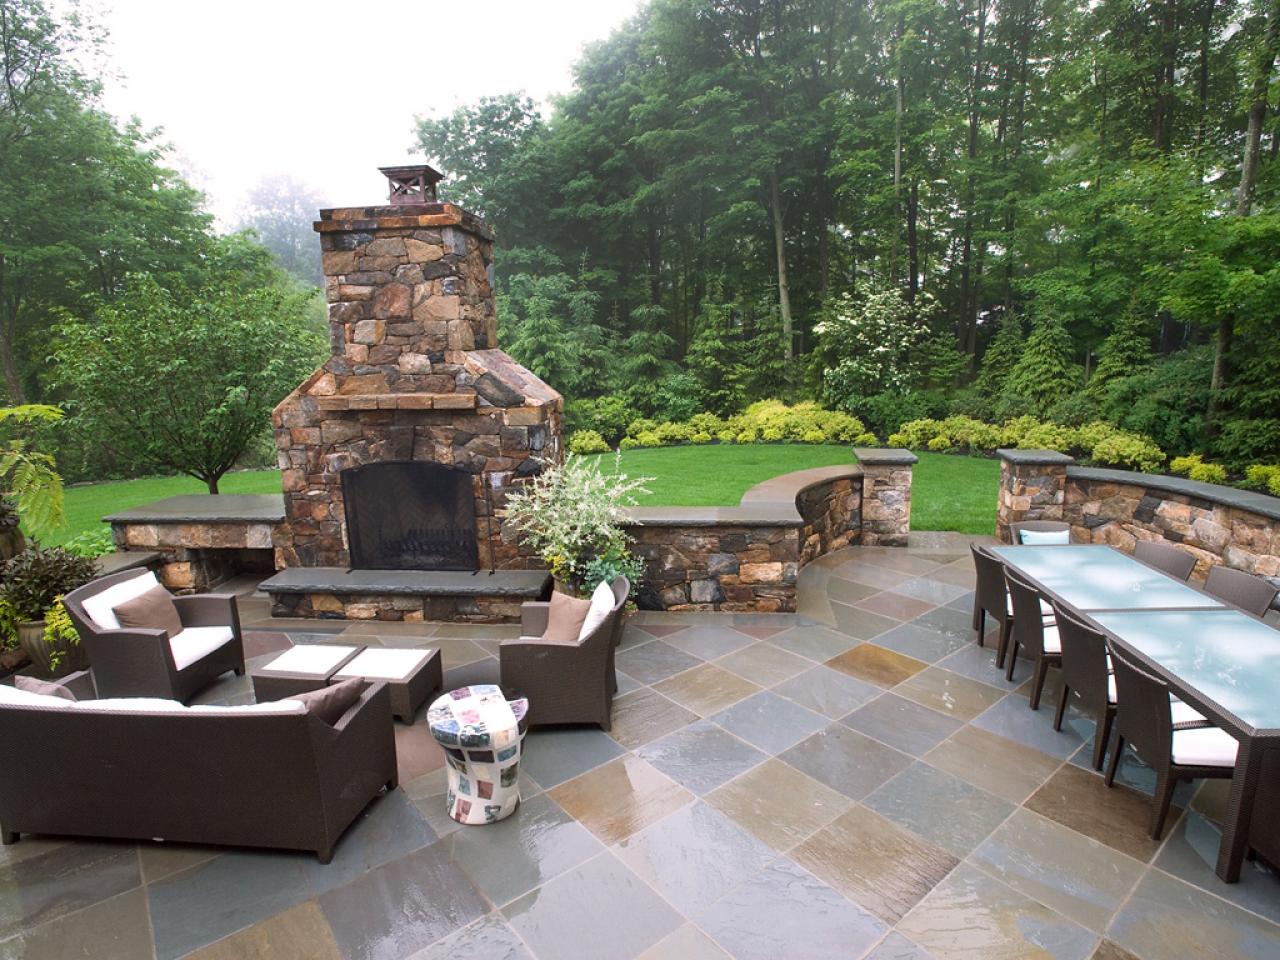 Discover new outdoor fireplace design ideas or find inspiration for your own fireplace with help from the experts at HGTV.com.